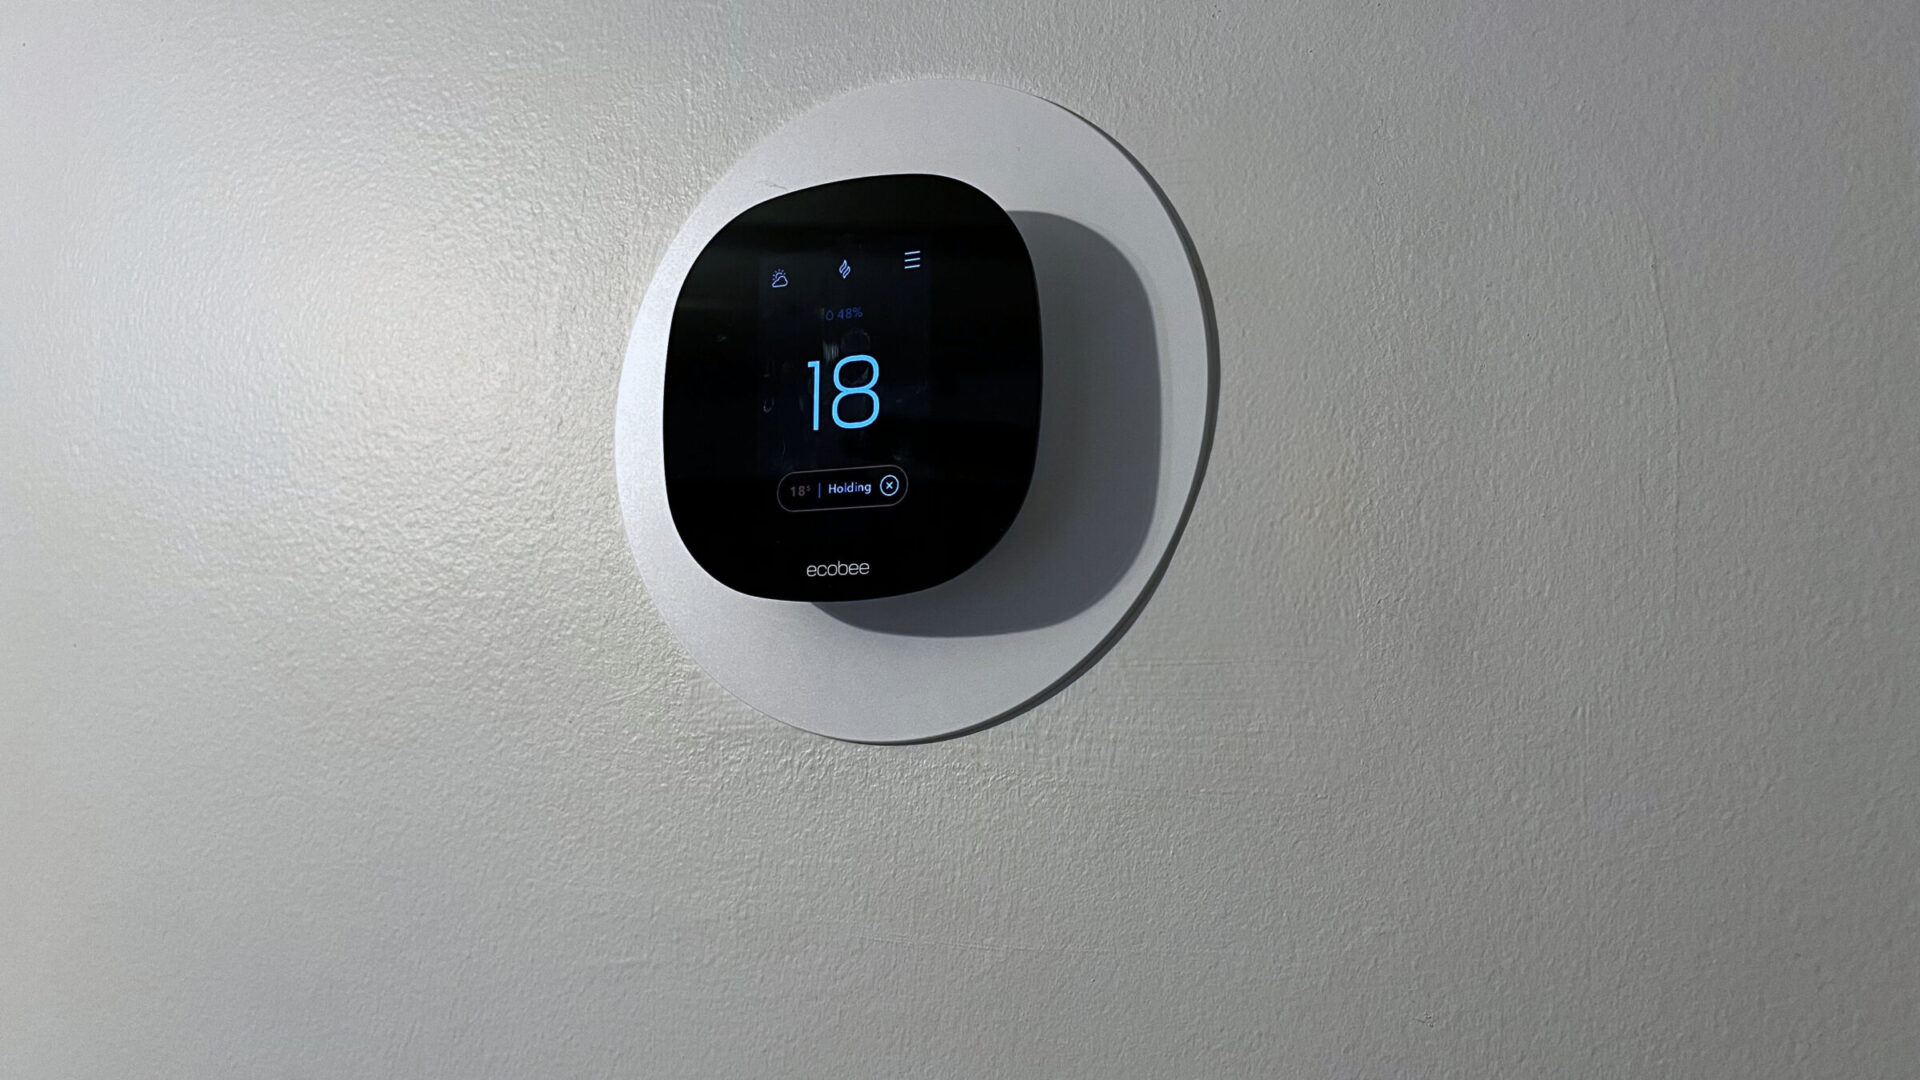 A modern, wall-mounted ecobee thermostat displays temperature at 18 degrees. The digital screen shows humidity and a holding temperature status.